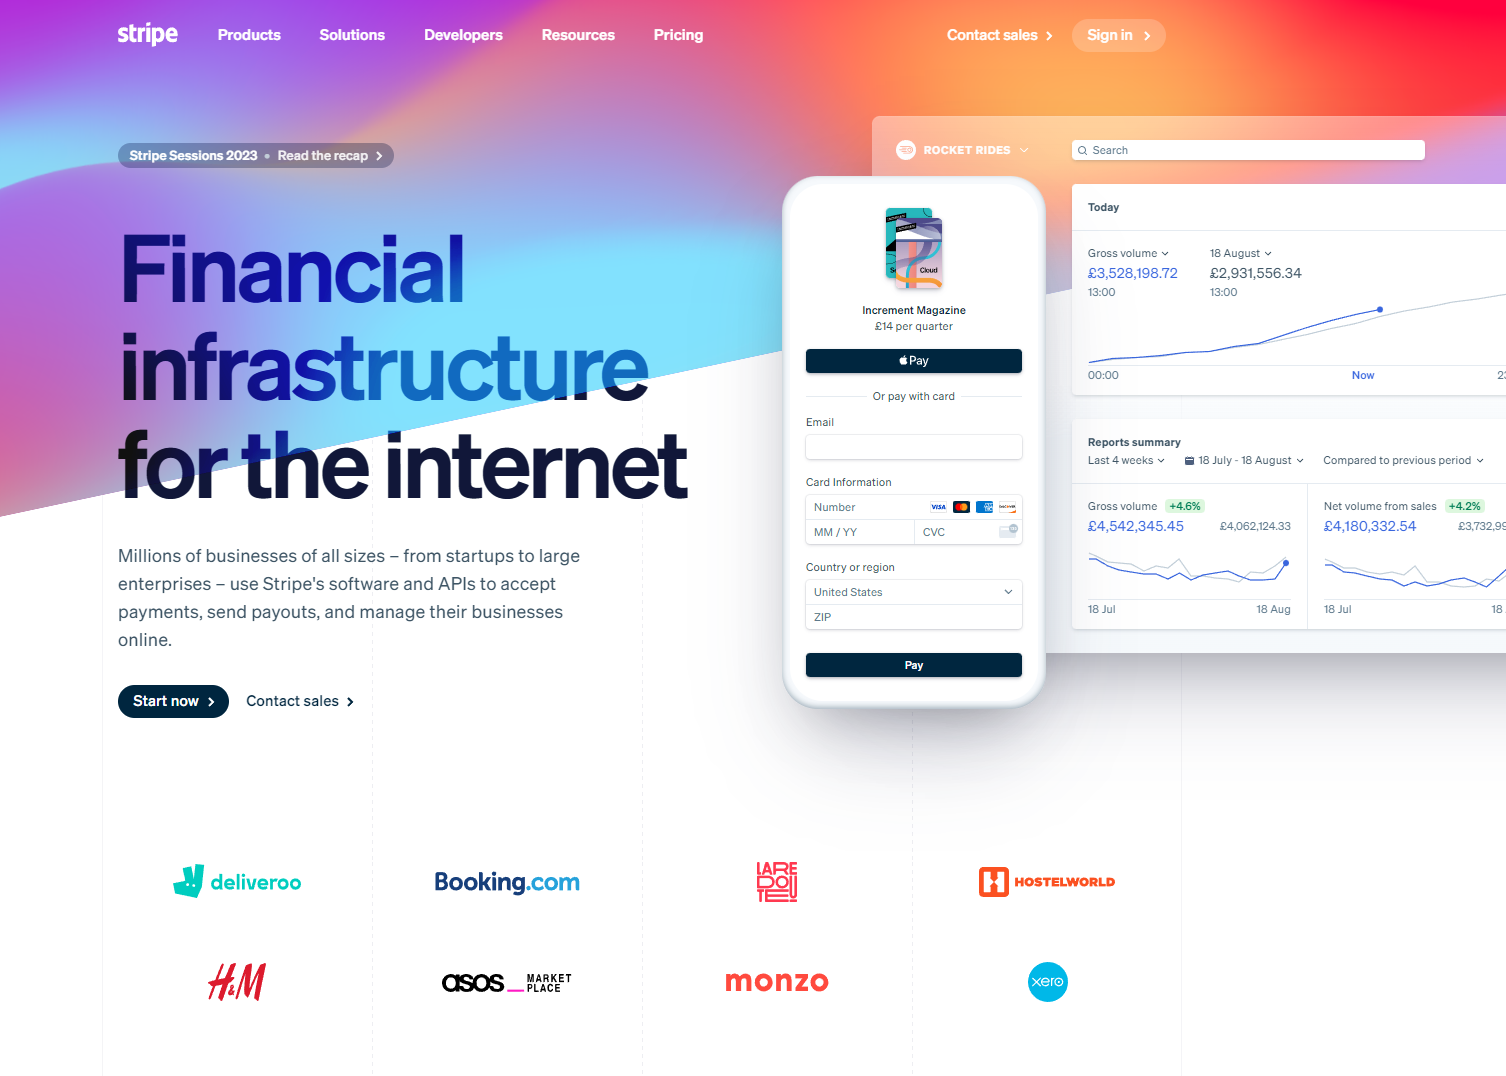 Image alt: Stripe supports payments, payouts, and financing.